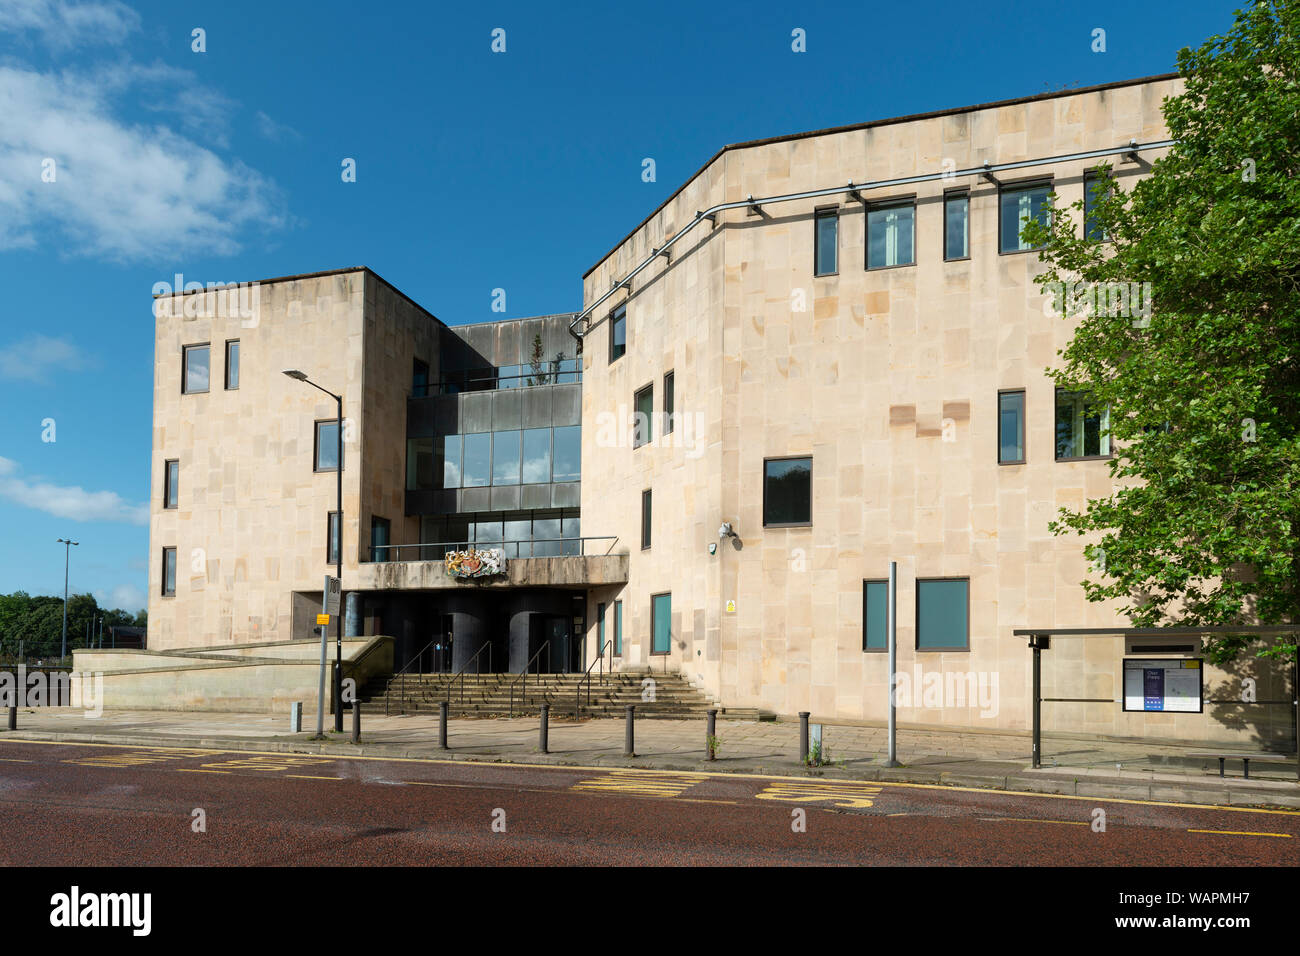 The The Law Courts located on Black Horse Street in Bolton, UK. Stock Photo